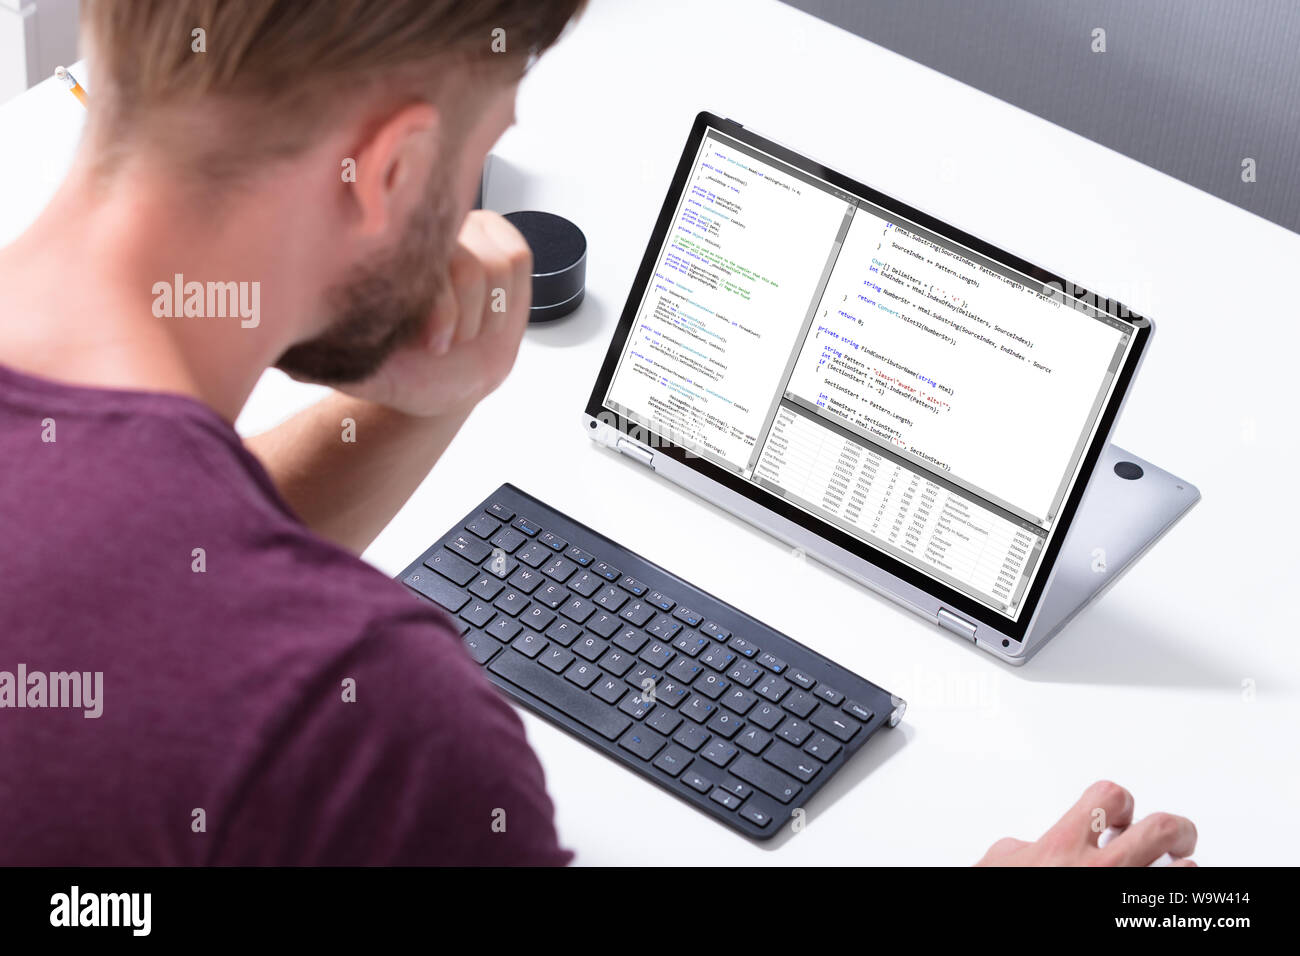 Man Programming Code On Laptop Computer In Office Stock Photo